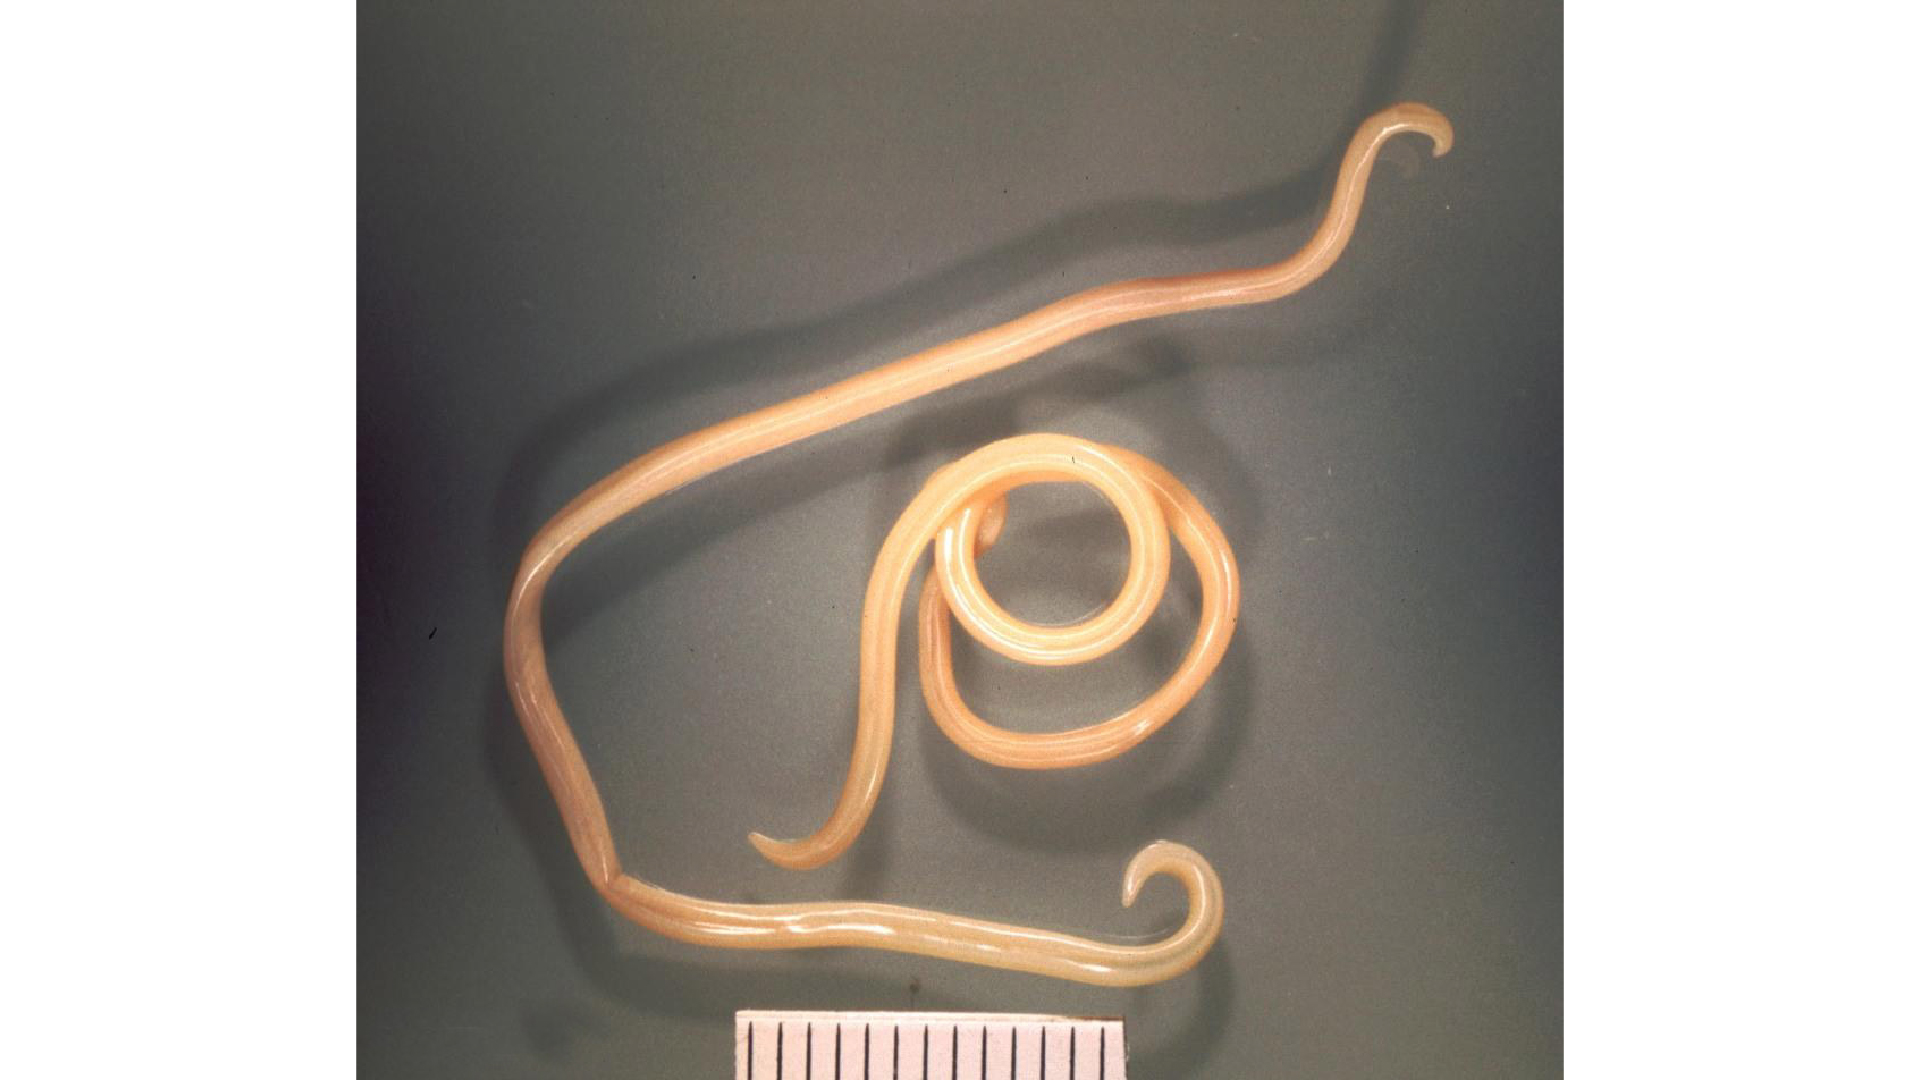 a photo of Toxocara canis adult nematode worms from a dog